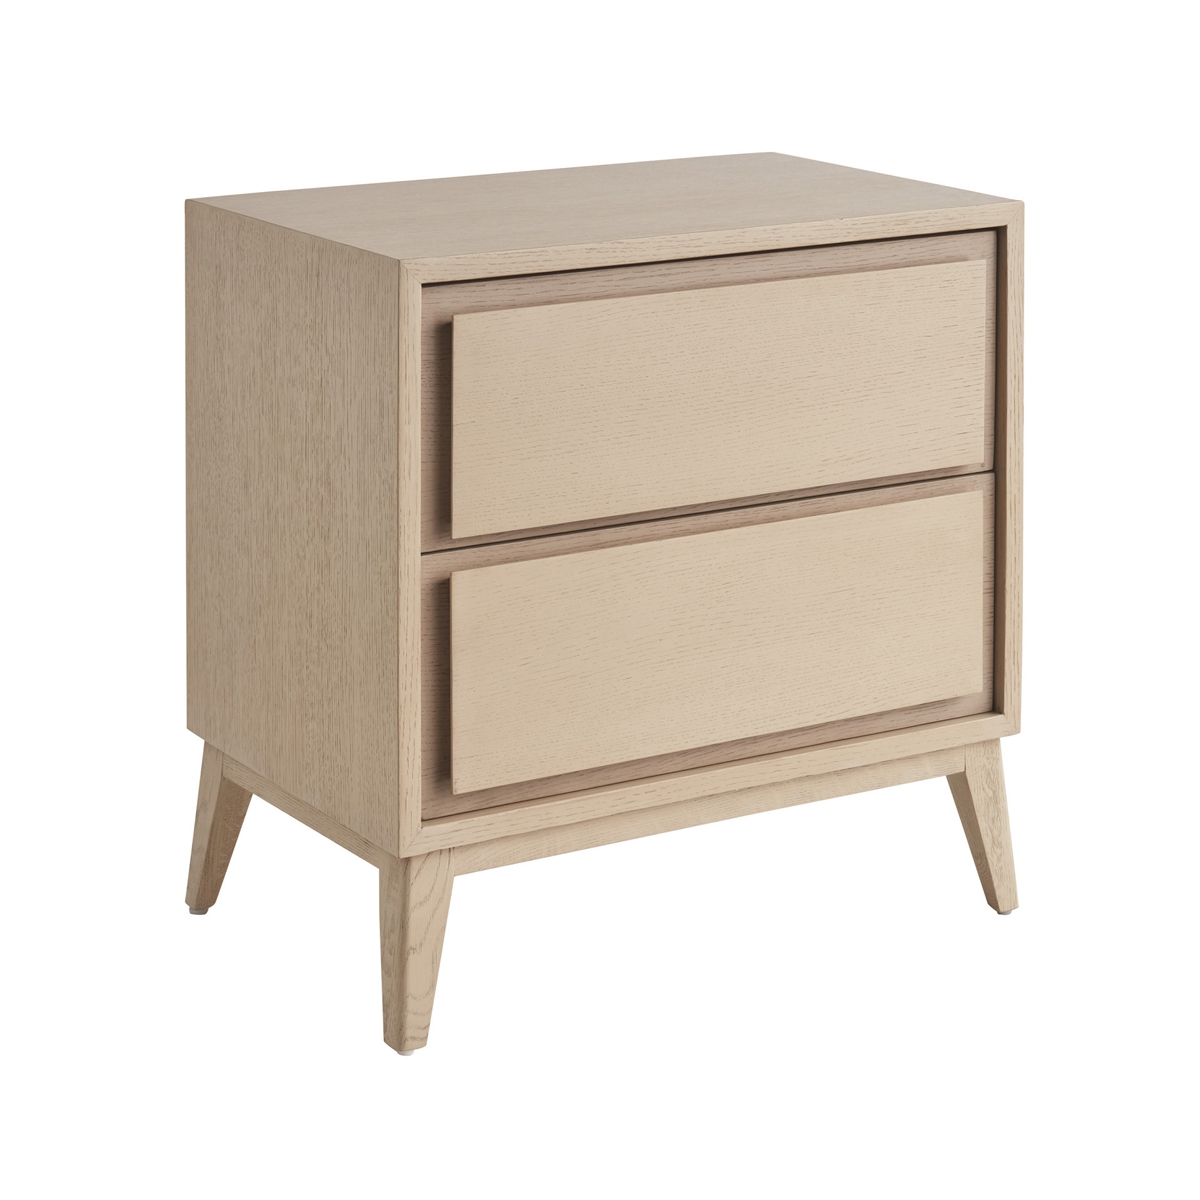 Picture of TILLMAN NIGHTSTAND